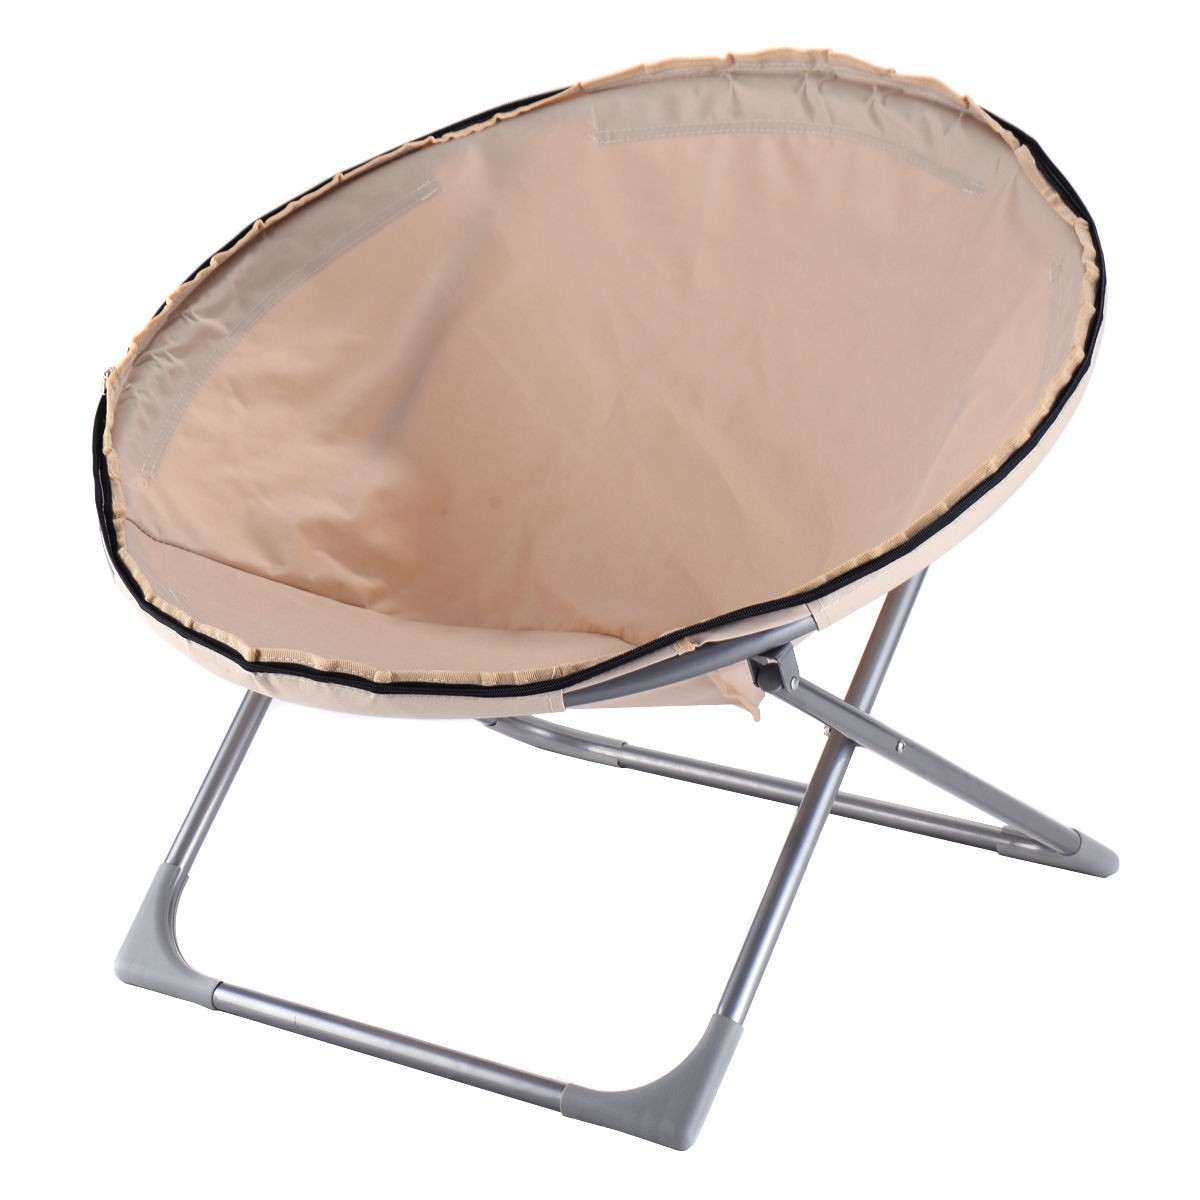 Oversized Large Folding Saucer Moon Chair Corduroy Round